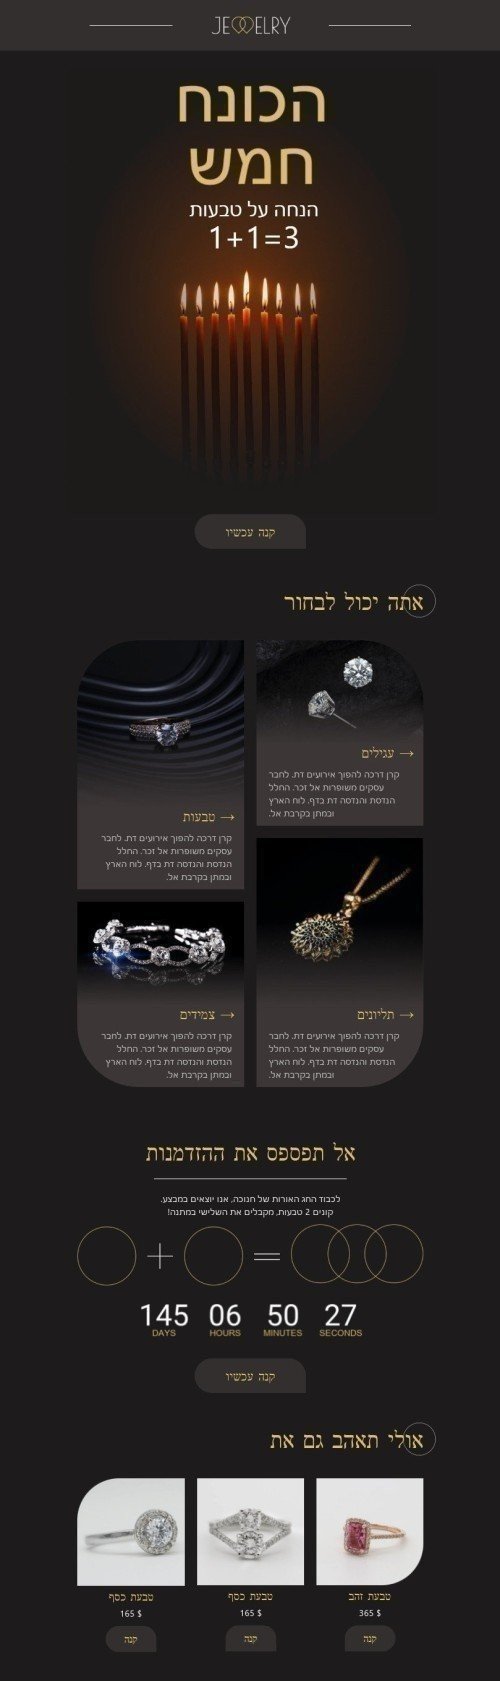 Hanukkah Email Template «Promotion on rings» for Jewelry industry desktop view